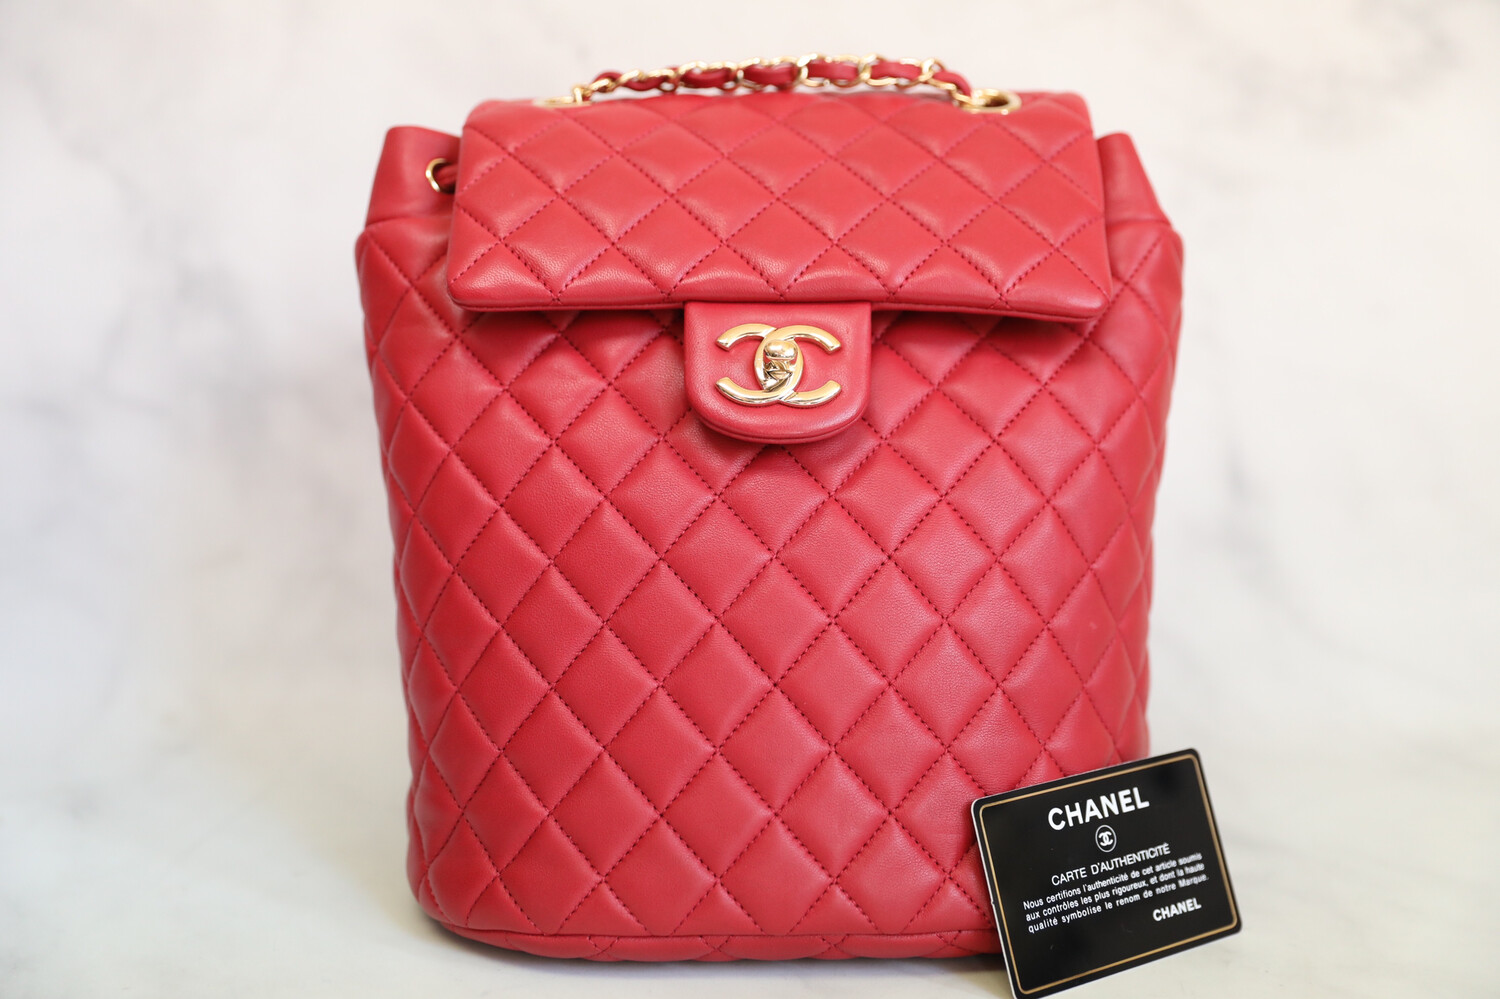 Chanel Urban Spirit Small Red Lambskin Backpack with Gold Hardware